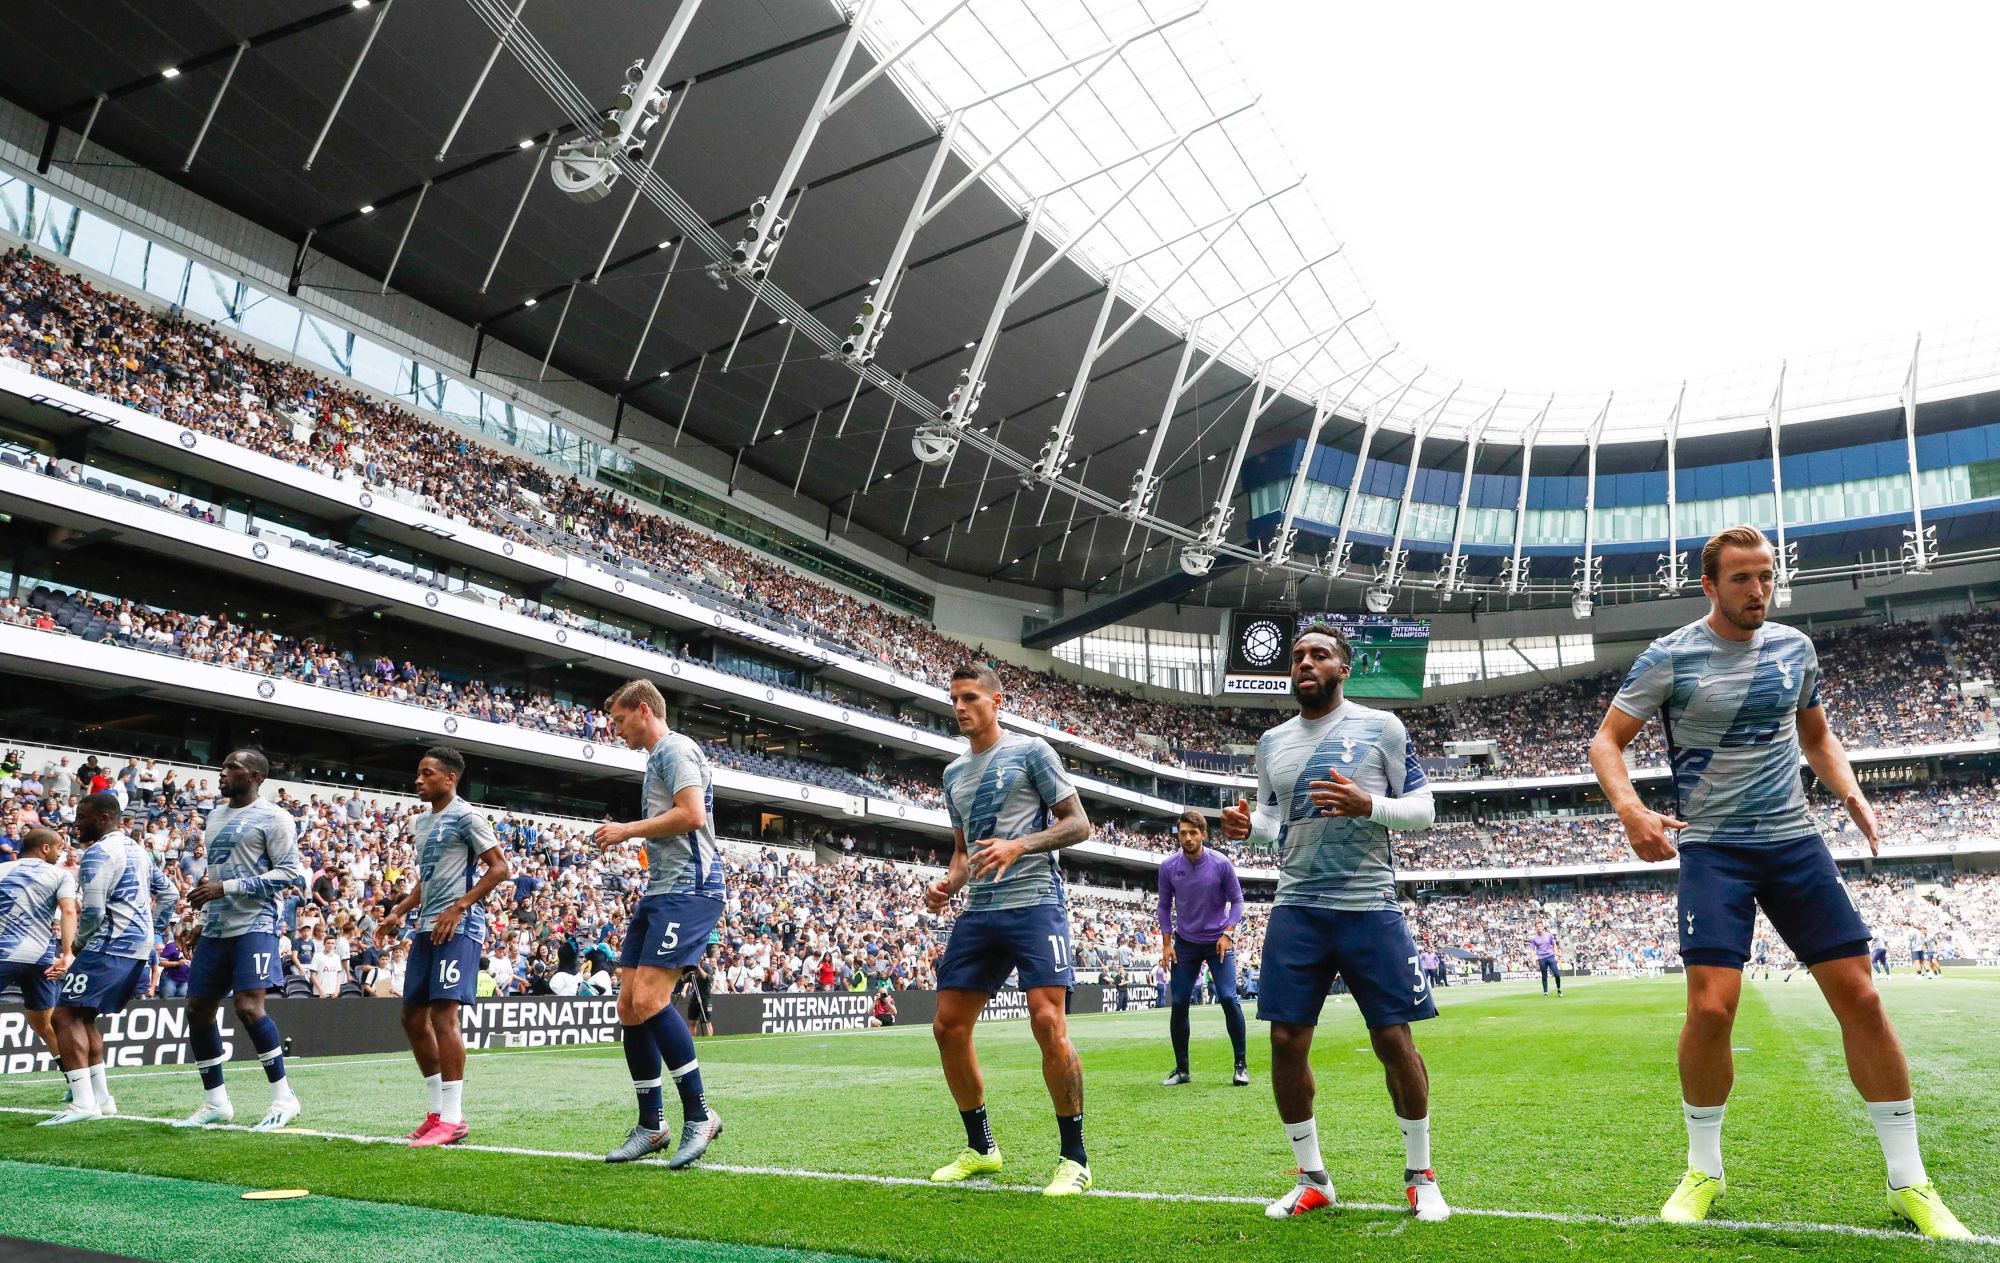 Tottenham Hotspur players warm up before their game against Inter Milan during the International Champions Cup match at Tottenham Hotspur Stadium, London. On August 4th, 2019. Photo : PA Images / Icon Sport